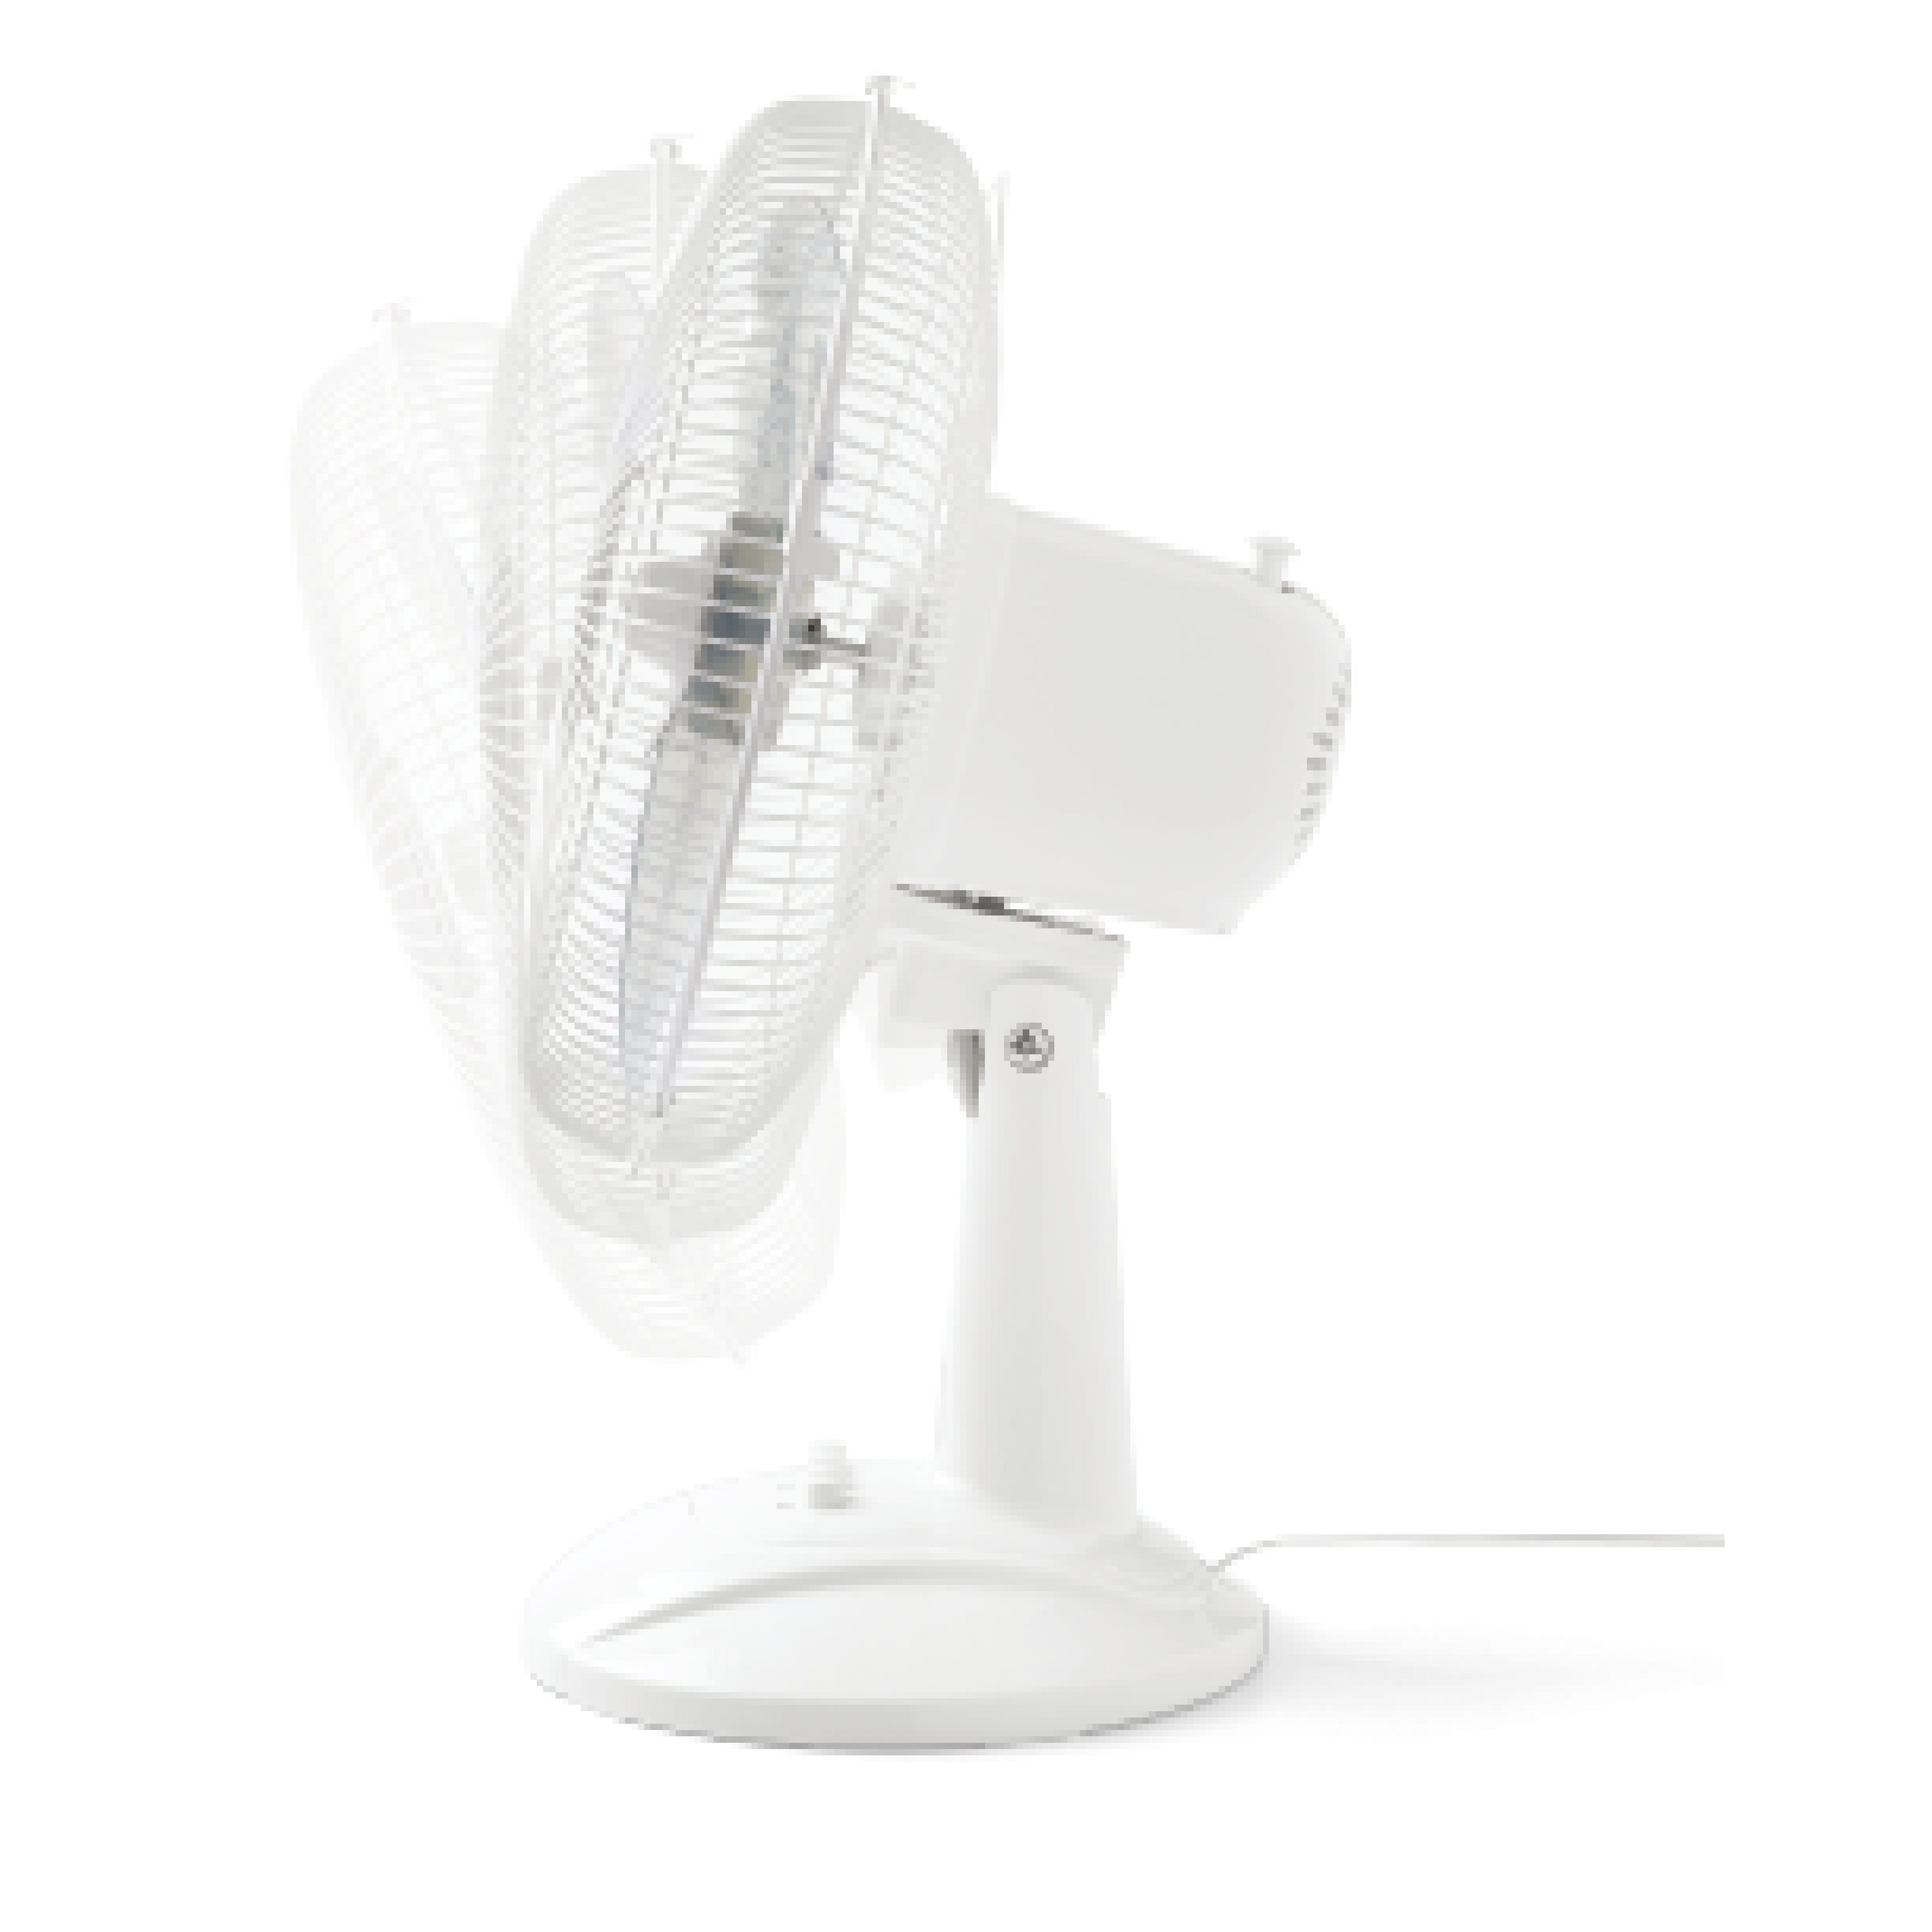 Mainstays 12" 3-Speed Oscillating Table Fan, FT30-8MBW, New, White - image 5 of 8